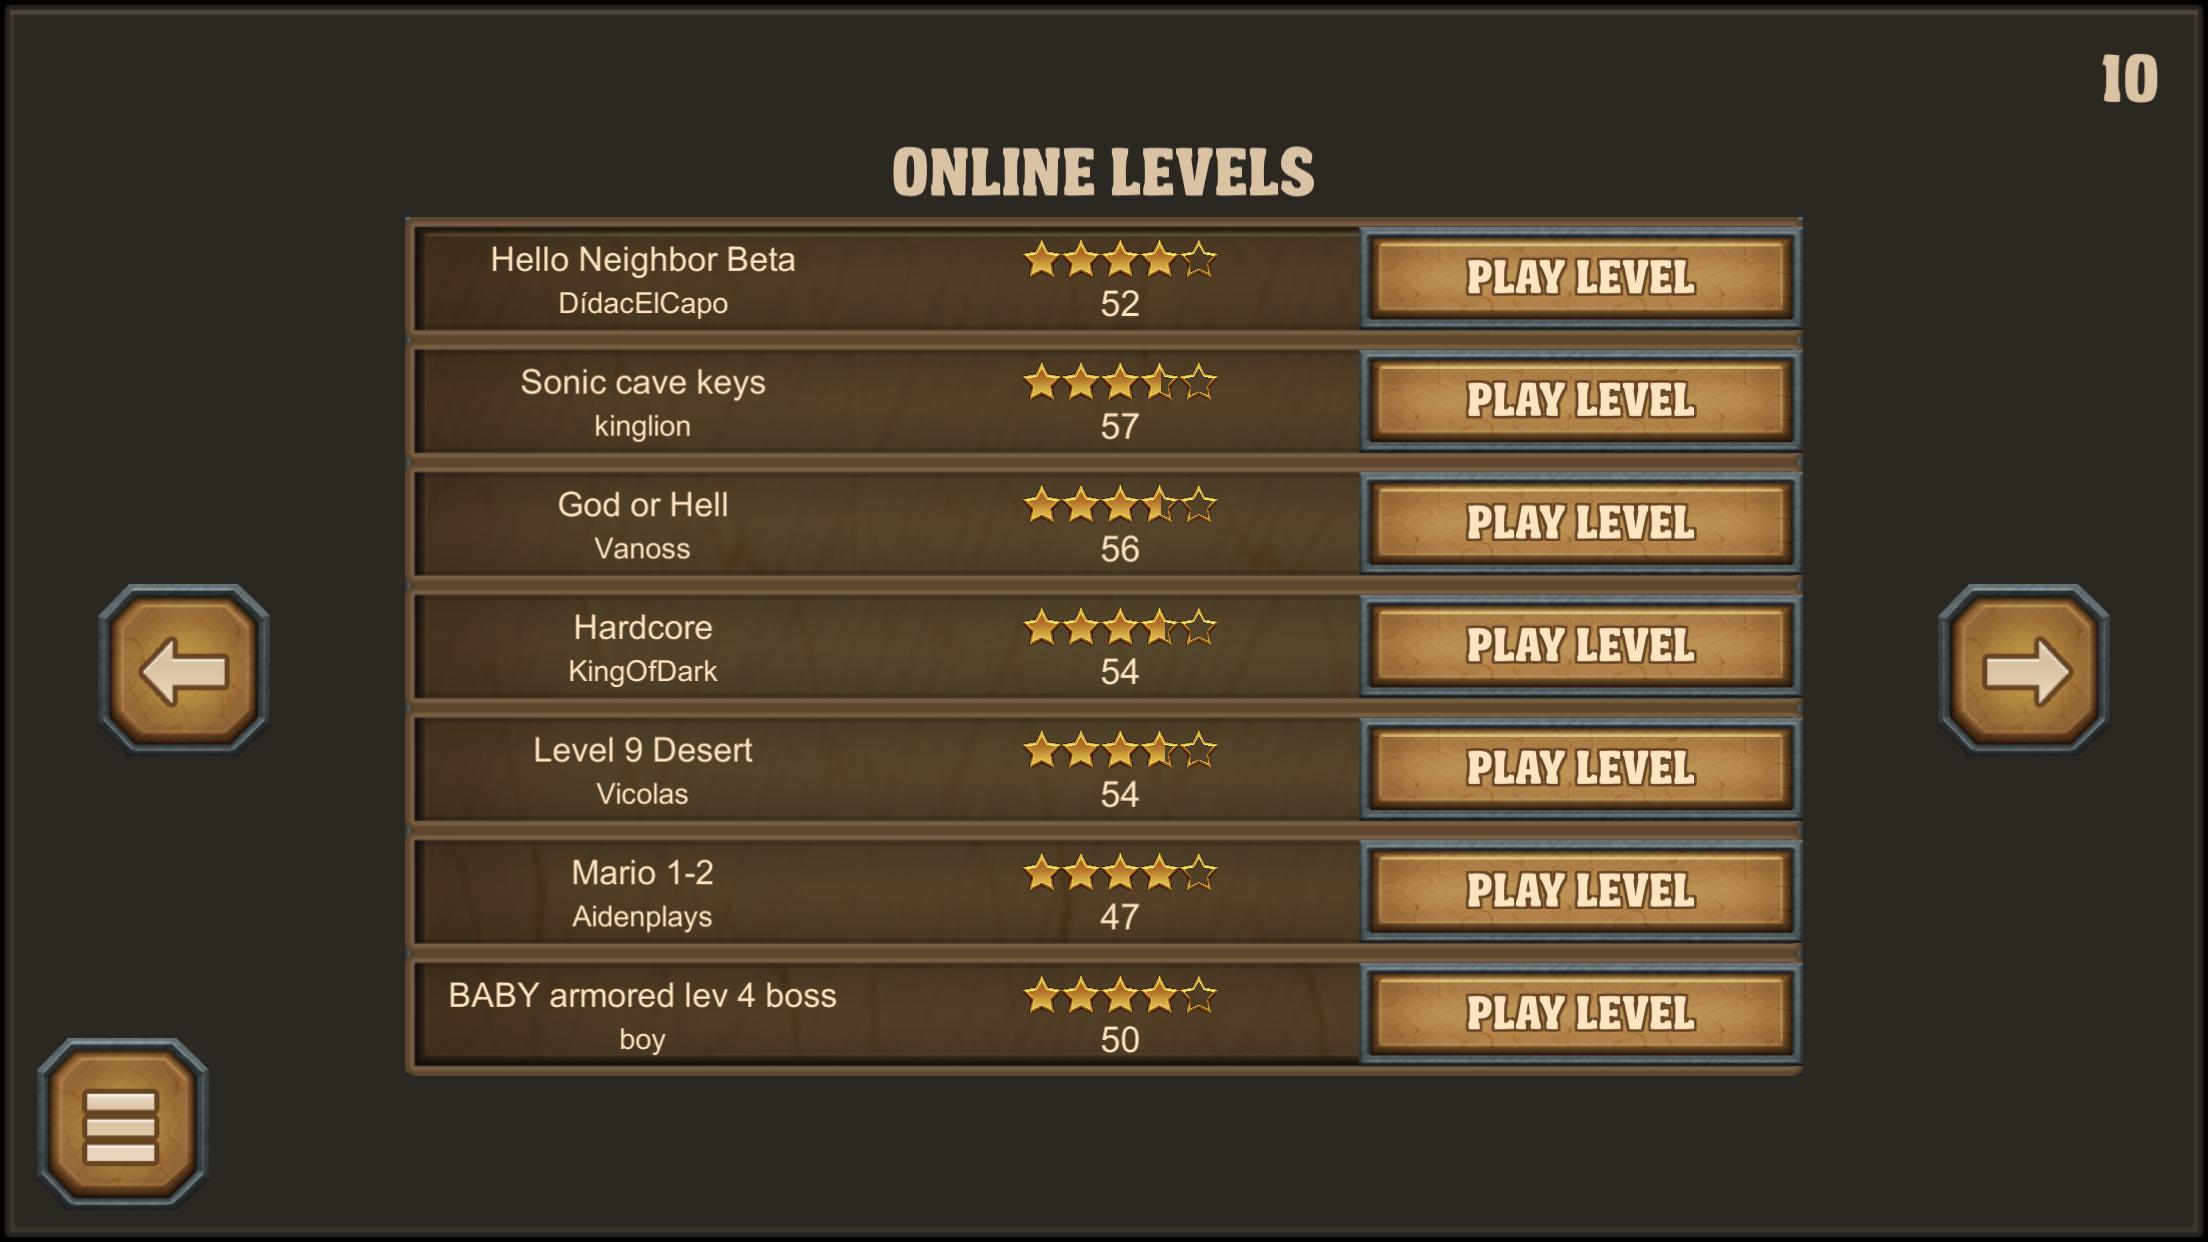 Epic Game Maker Create and Share Your Levels 1.9 Screenshot 4